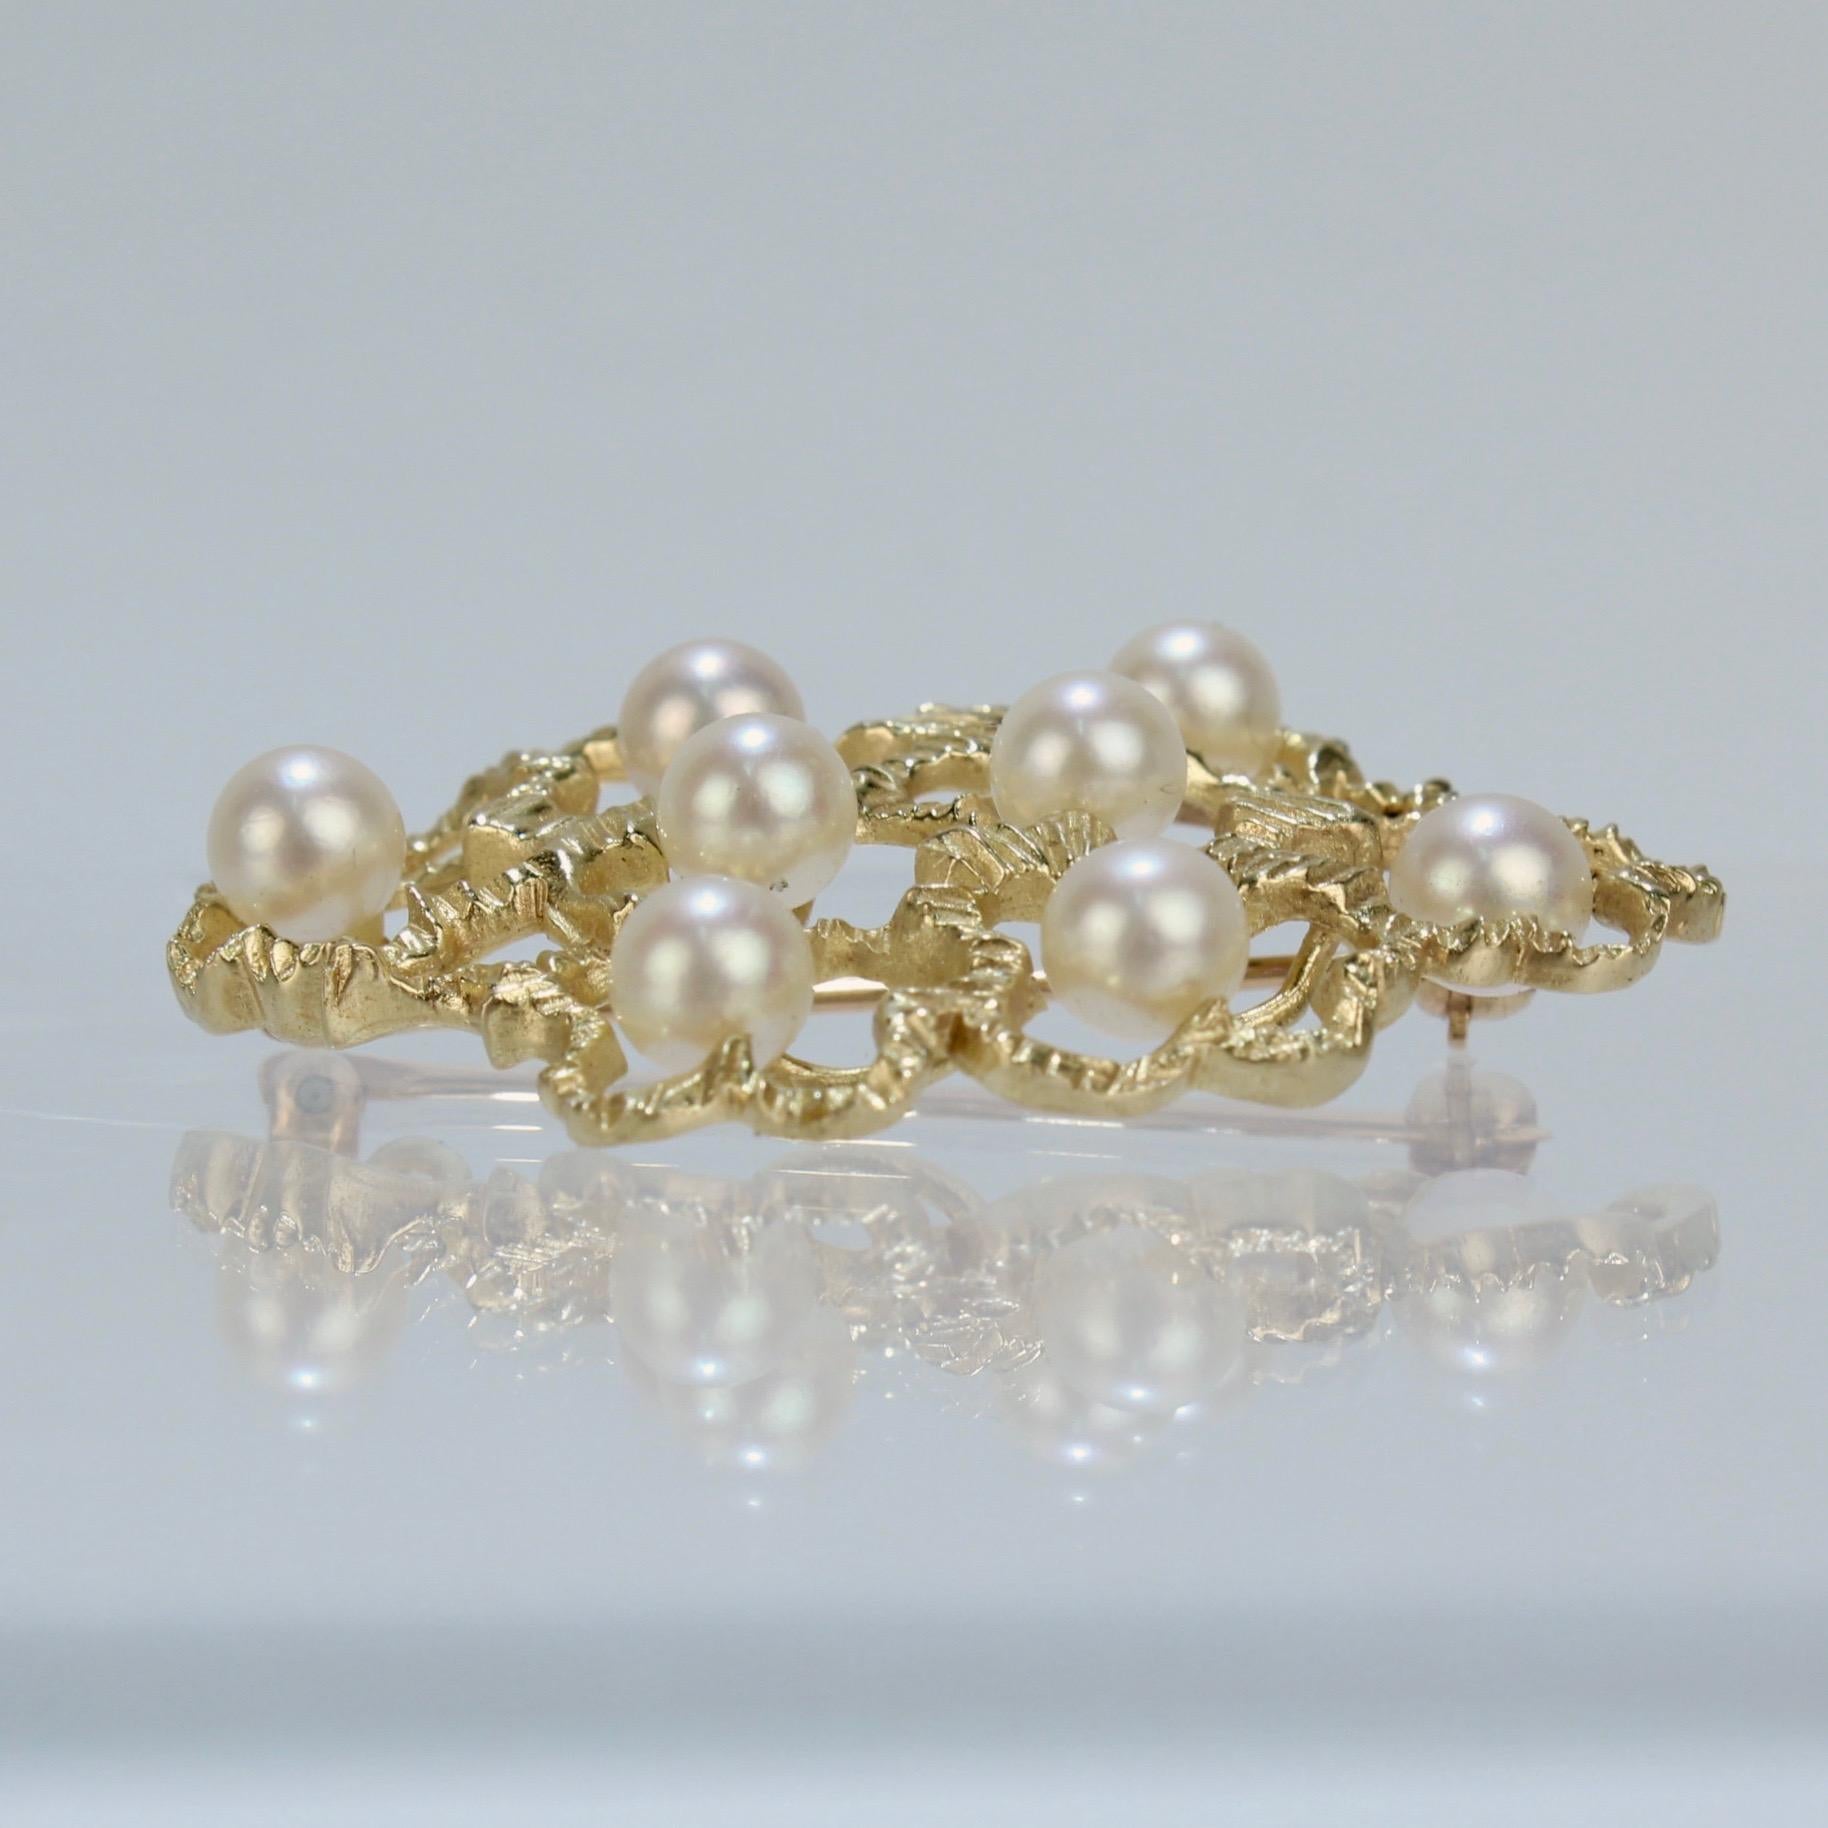 Modernist 14 Karat Gold and White Round Pearl Floral Brooch or Pin In Good Condition For Sale In Philadelphia, PA